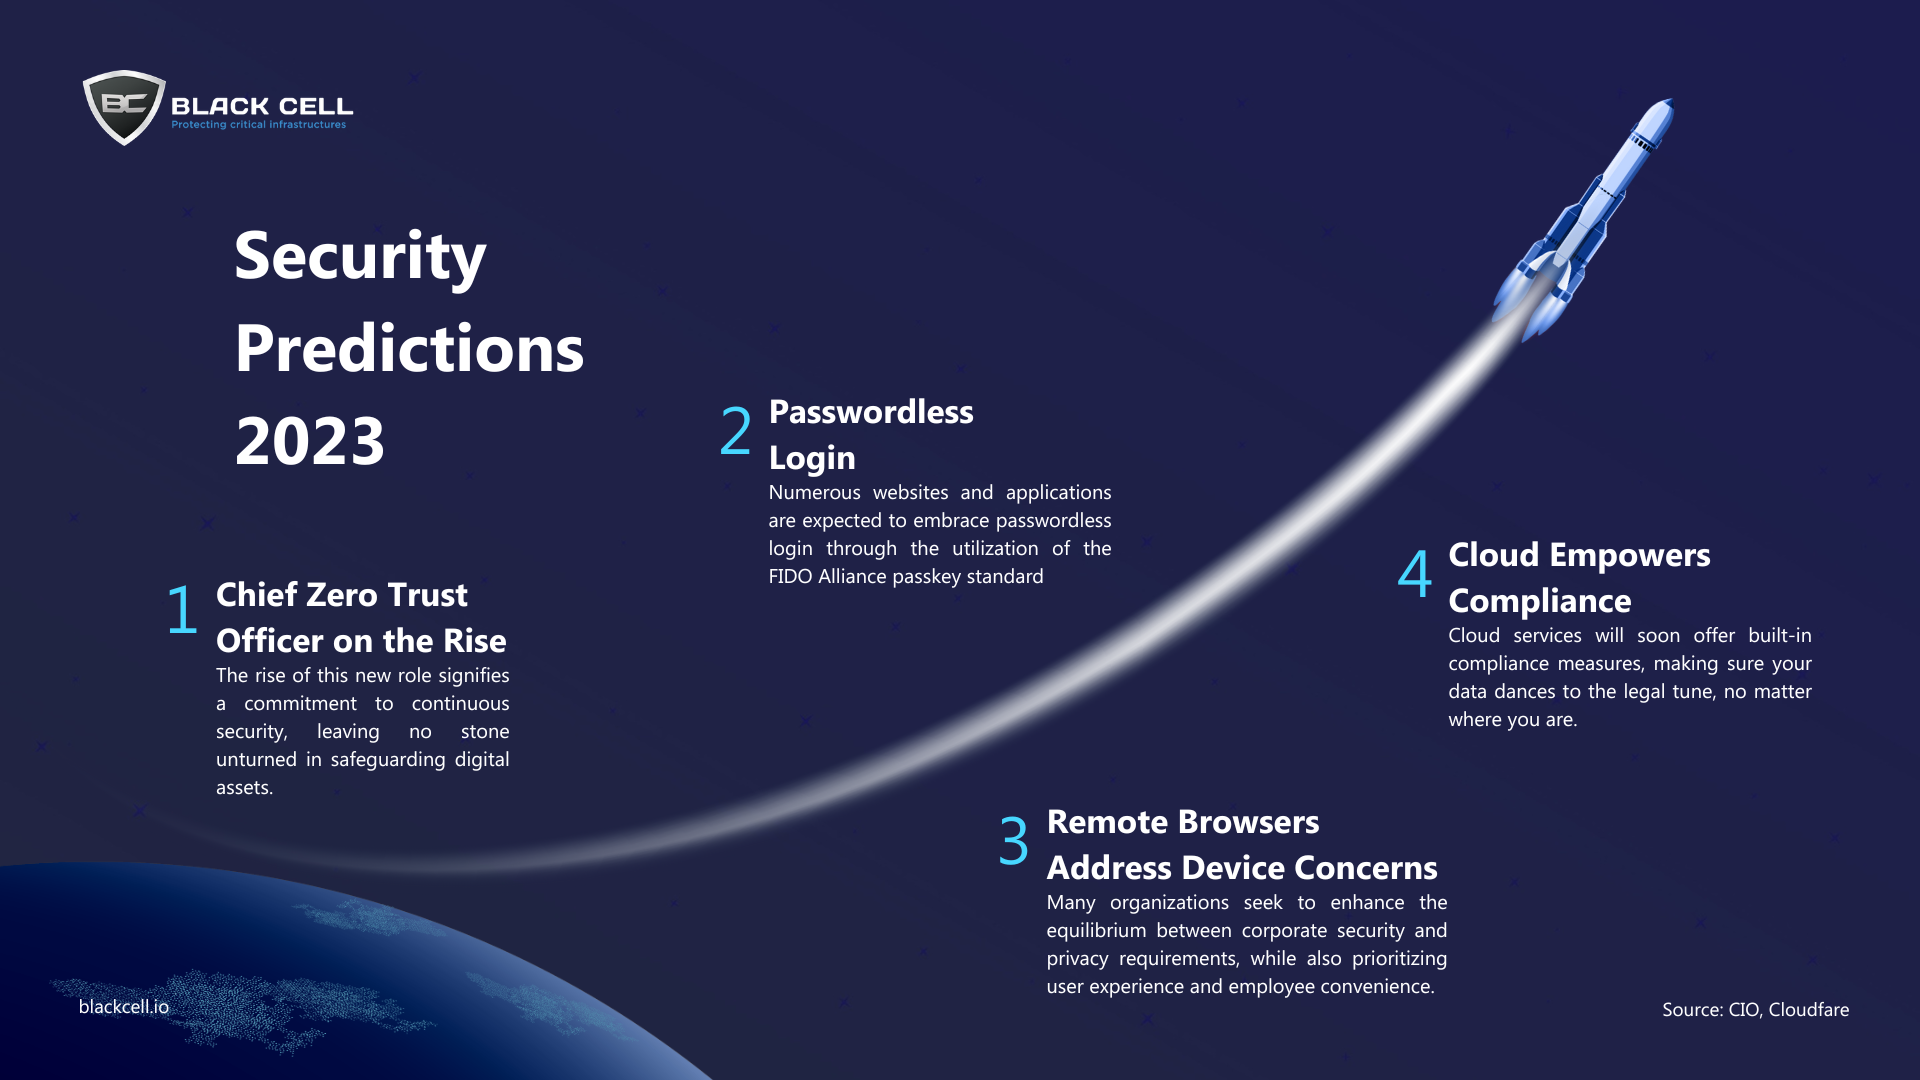 Security Predictions 2023 Infographic